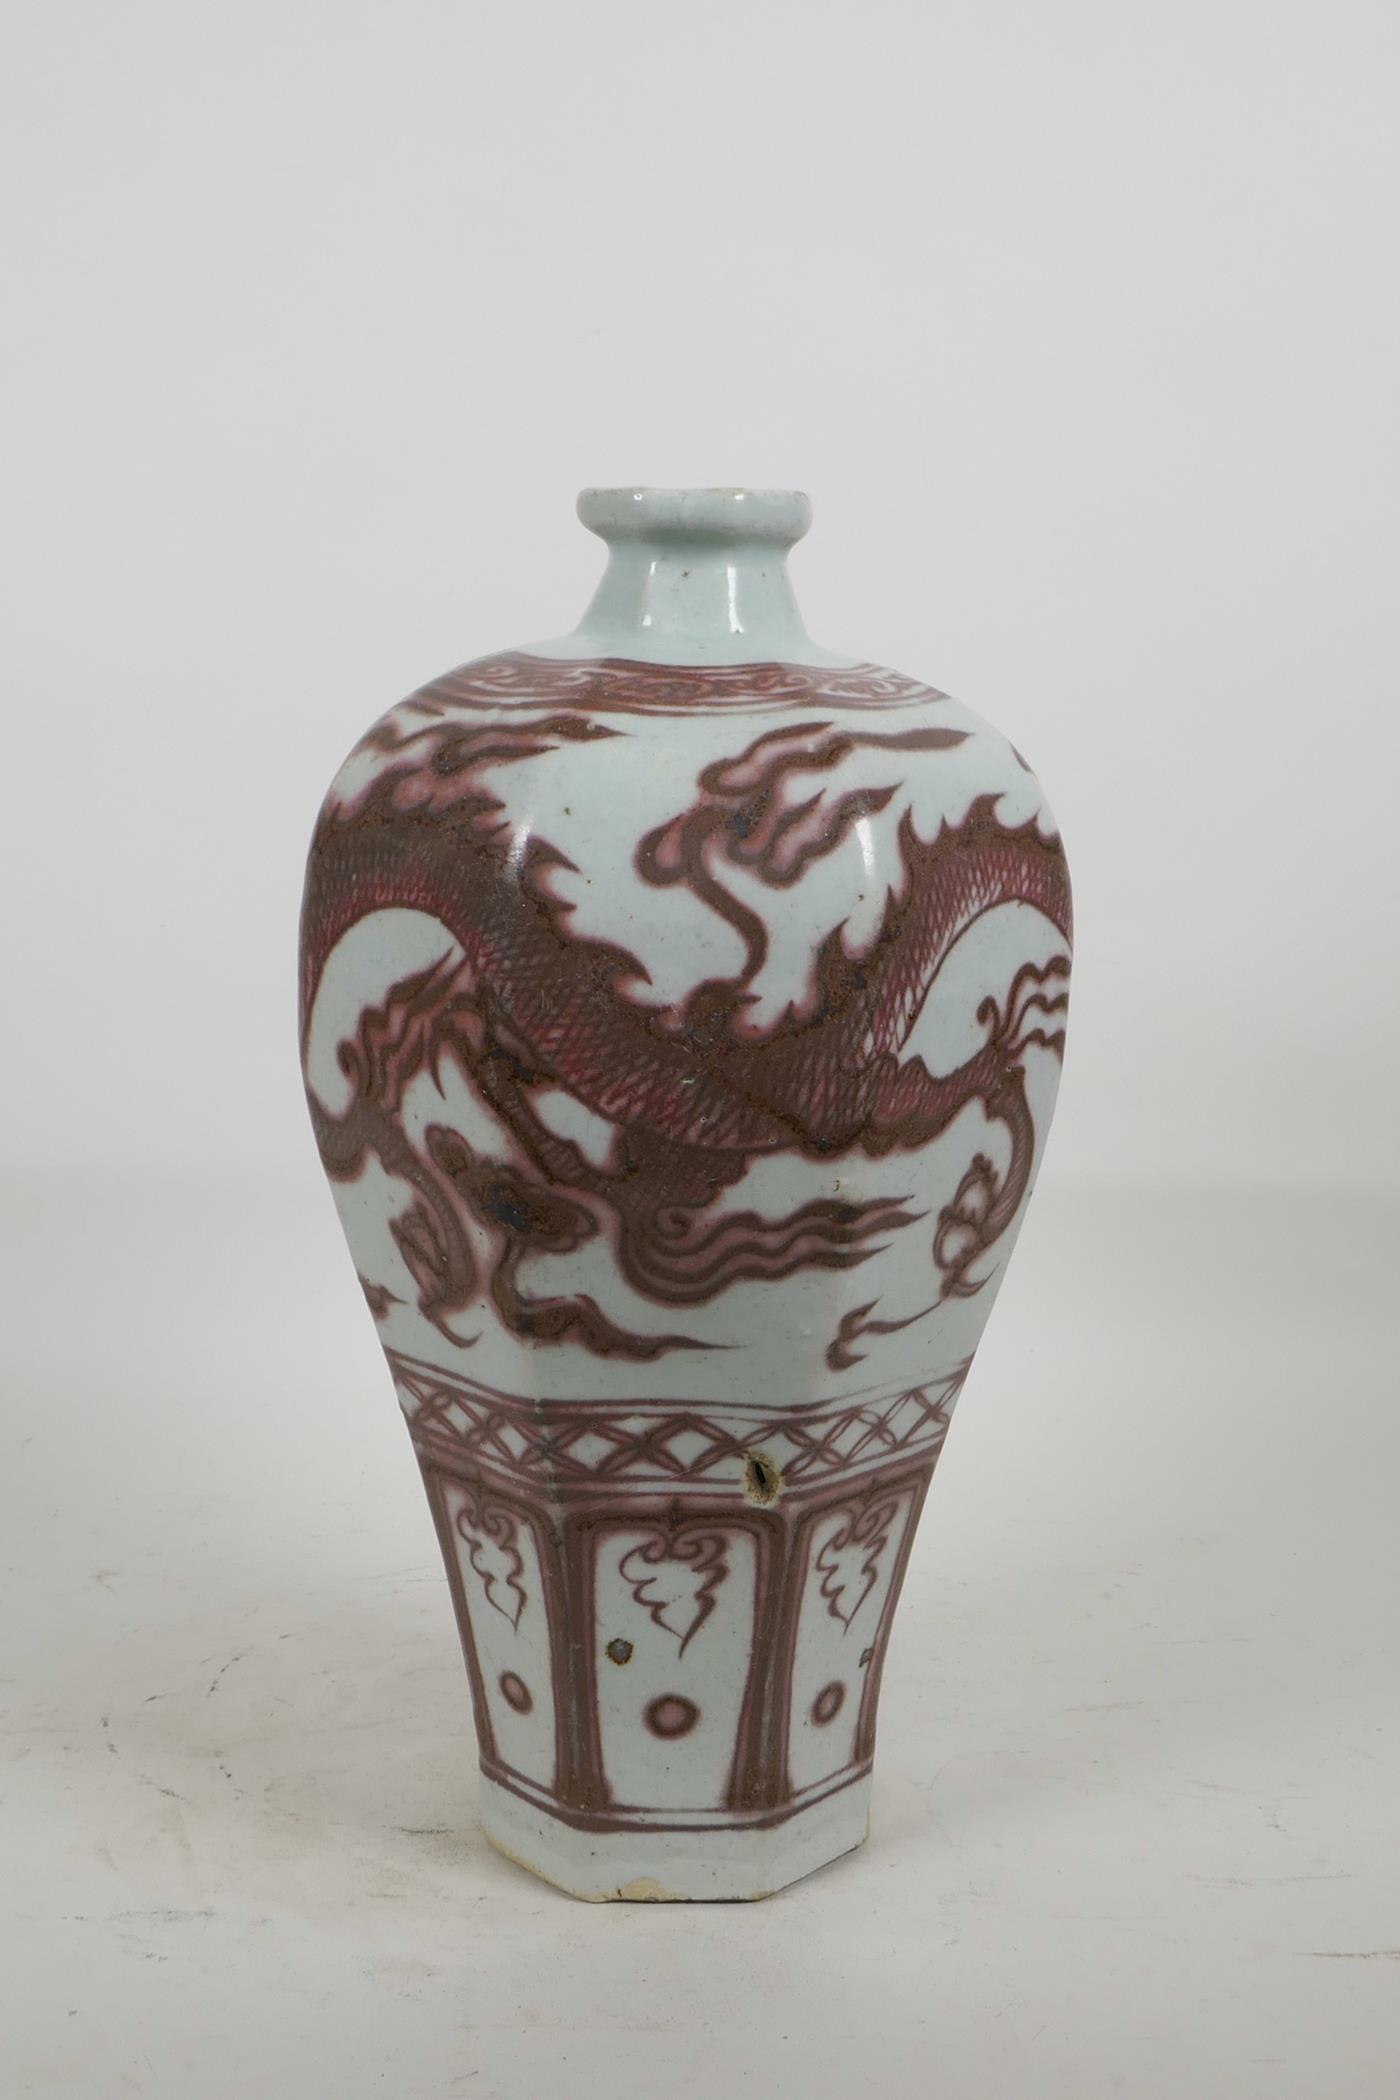 A Chinese porcelain vase with ironstone red dragon decoration, 11½" high - Image 2 of 4